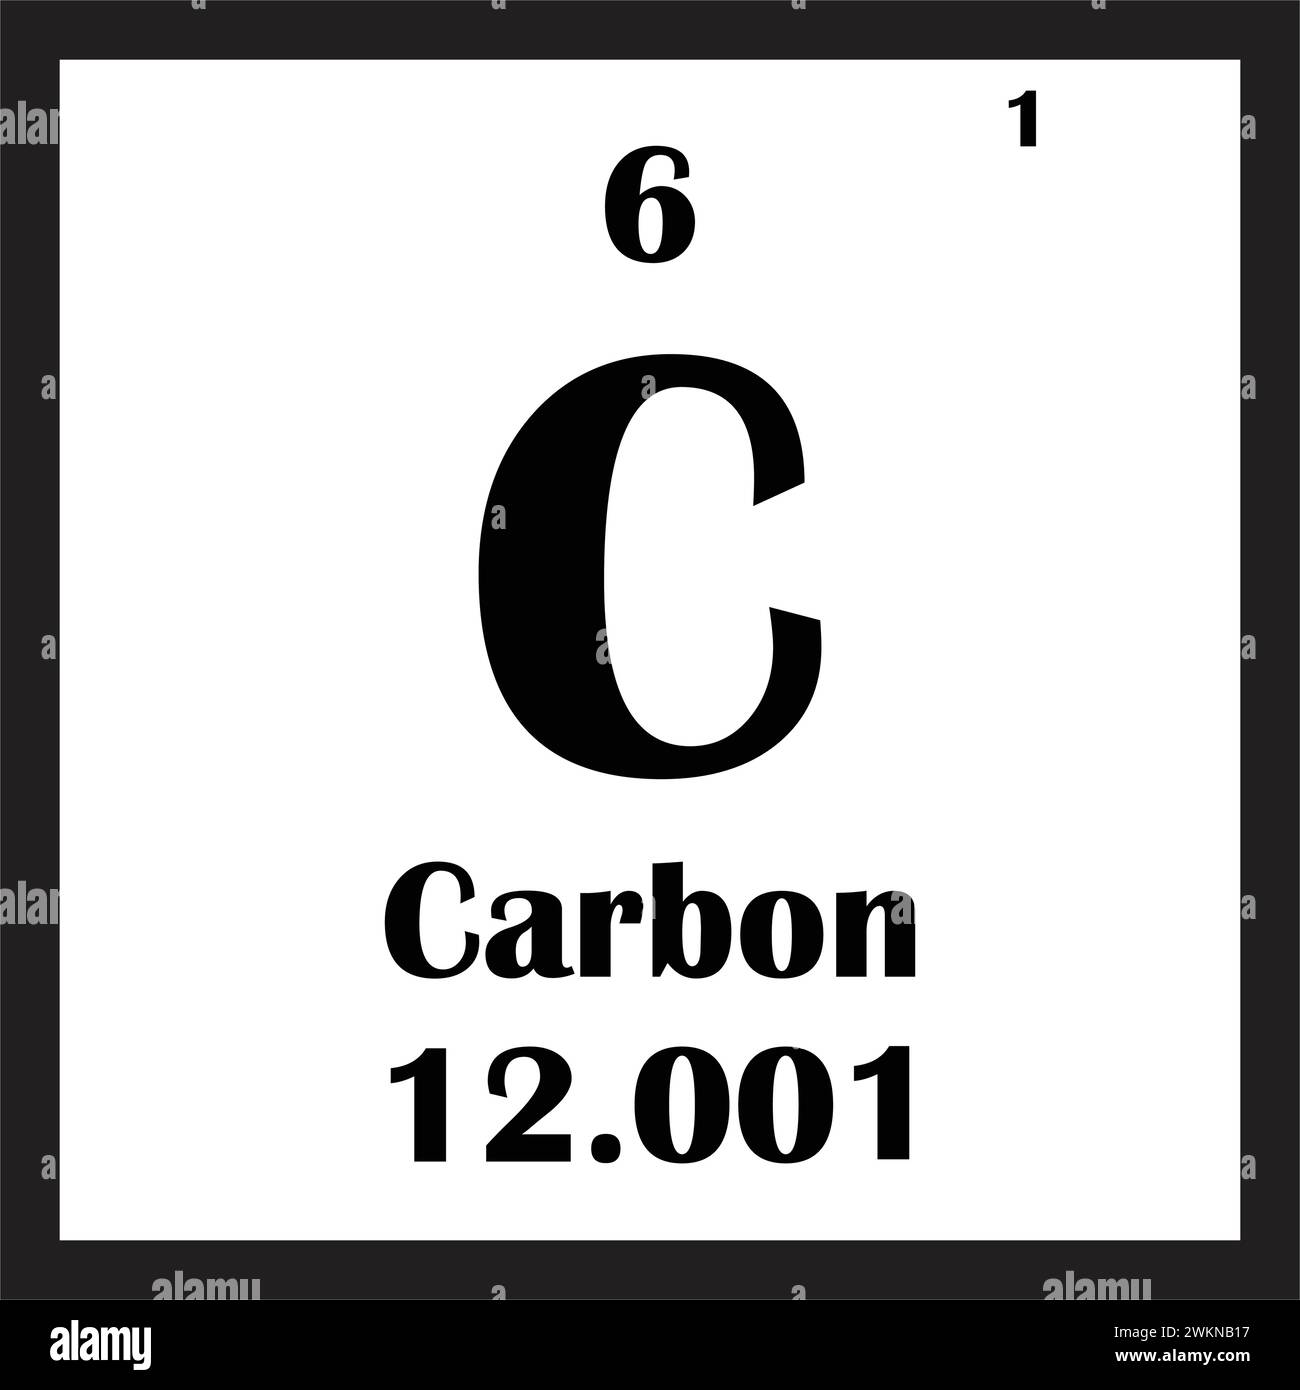 carbon chemical element icon vector illustration design Stock Vector